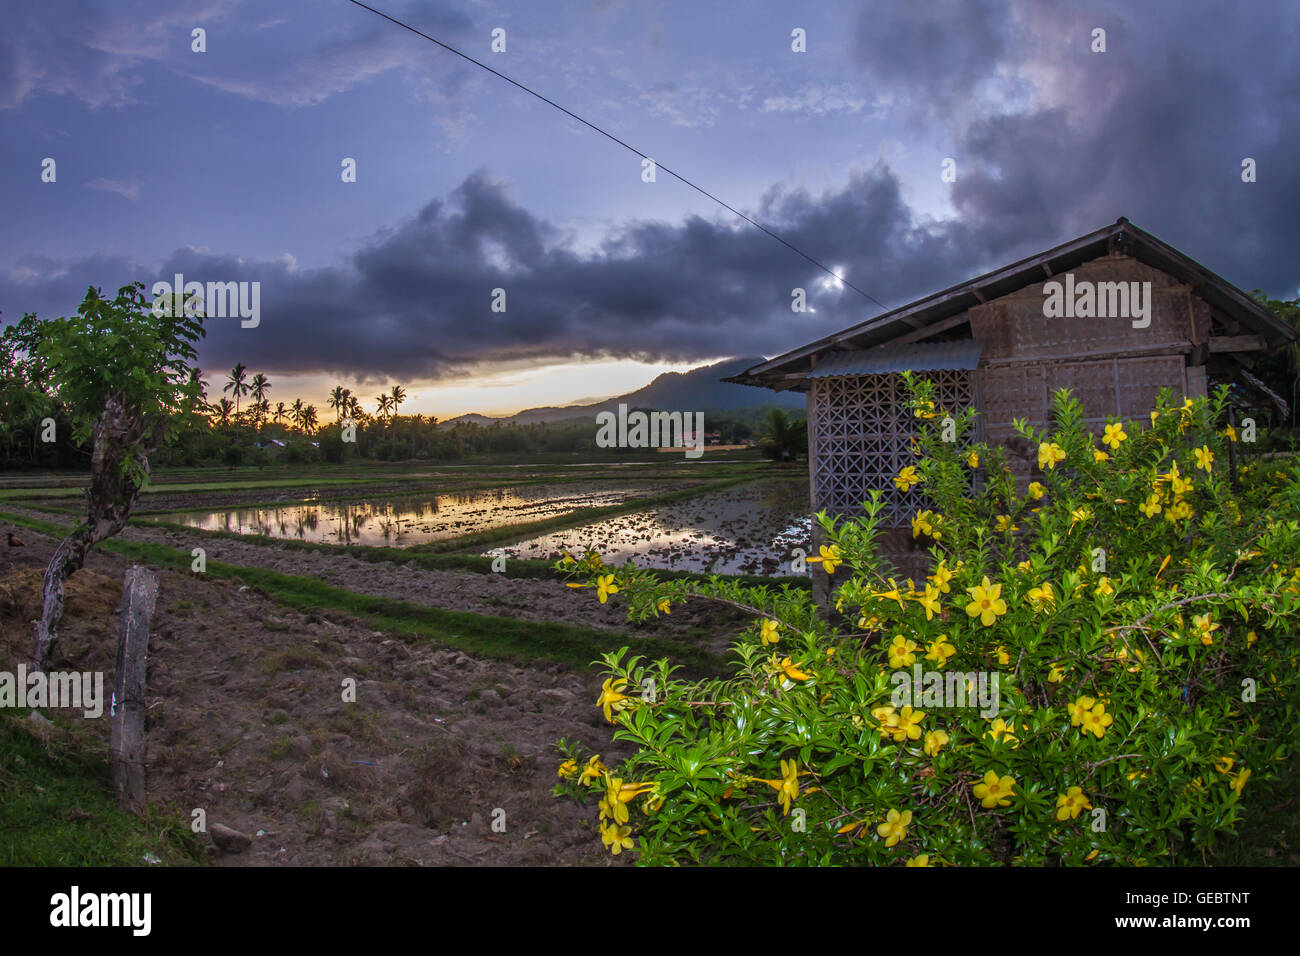 rice field Philippines Asia sunset flowers landscape Stock Photo